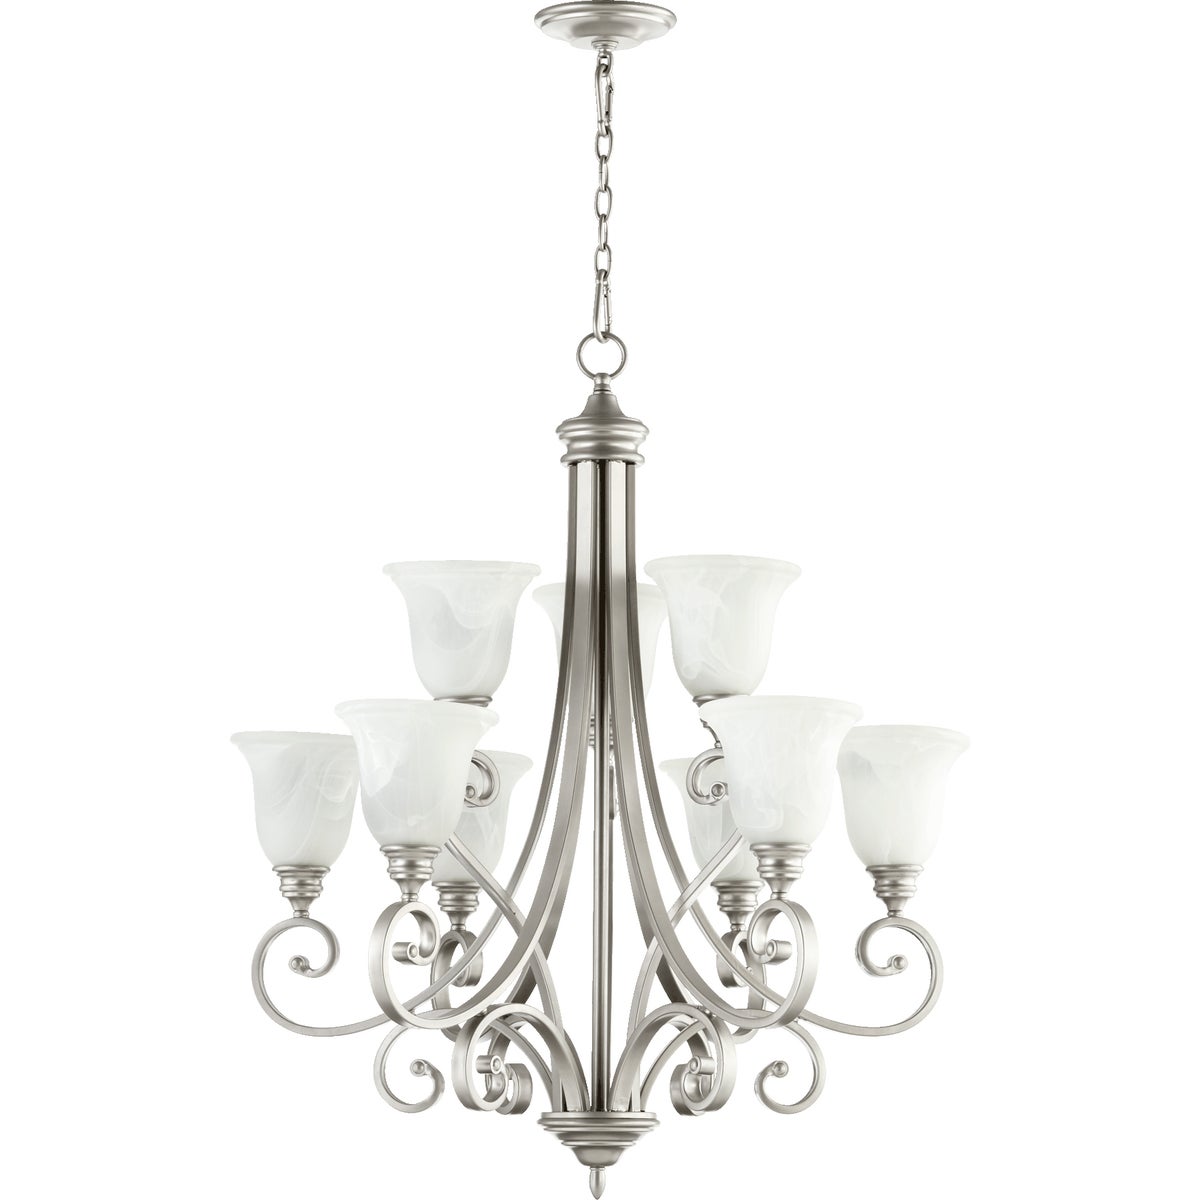 Foyer Chandelier with White Glass Shades, Curvaceous Arms, and Symmetrical Balance. Celebrate timeless lighting design with this luxury Quorum International fixture. Perfect for traditional and transitional spaces. 31&quot;W x 36.25&quot;H. 2-Year Warranty. UL Listed for Dry Locations. 9 Medium E26 Bulbs (60W, not included). Dimmable.